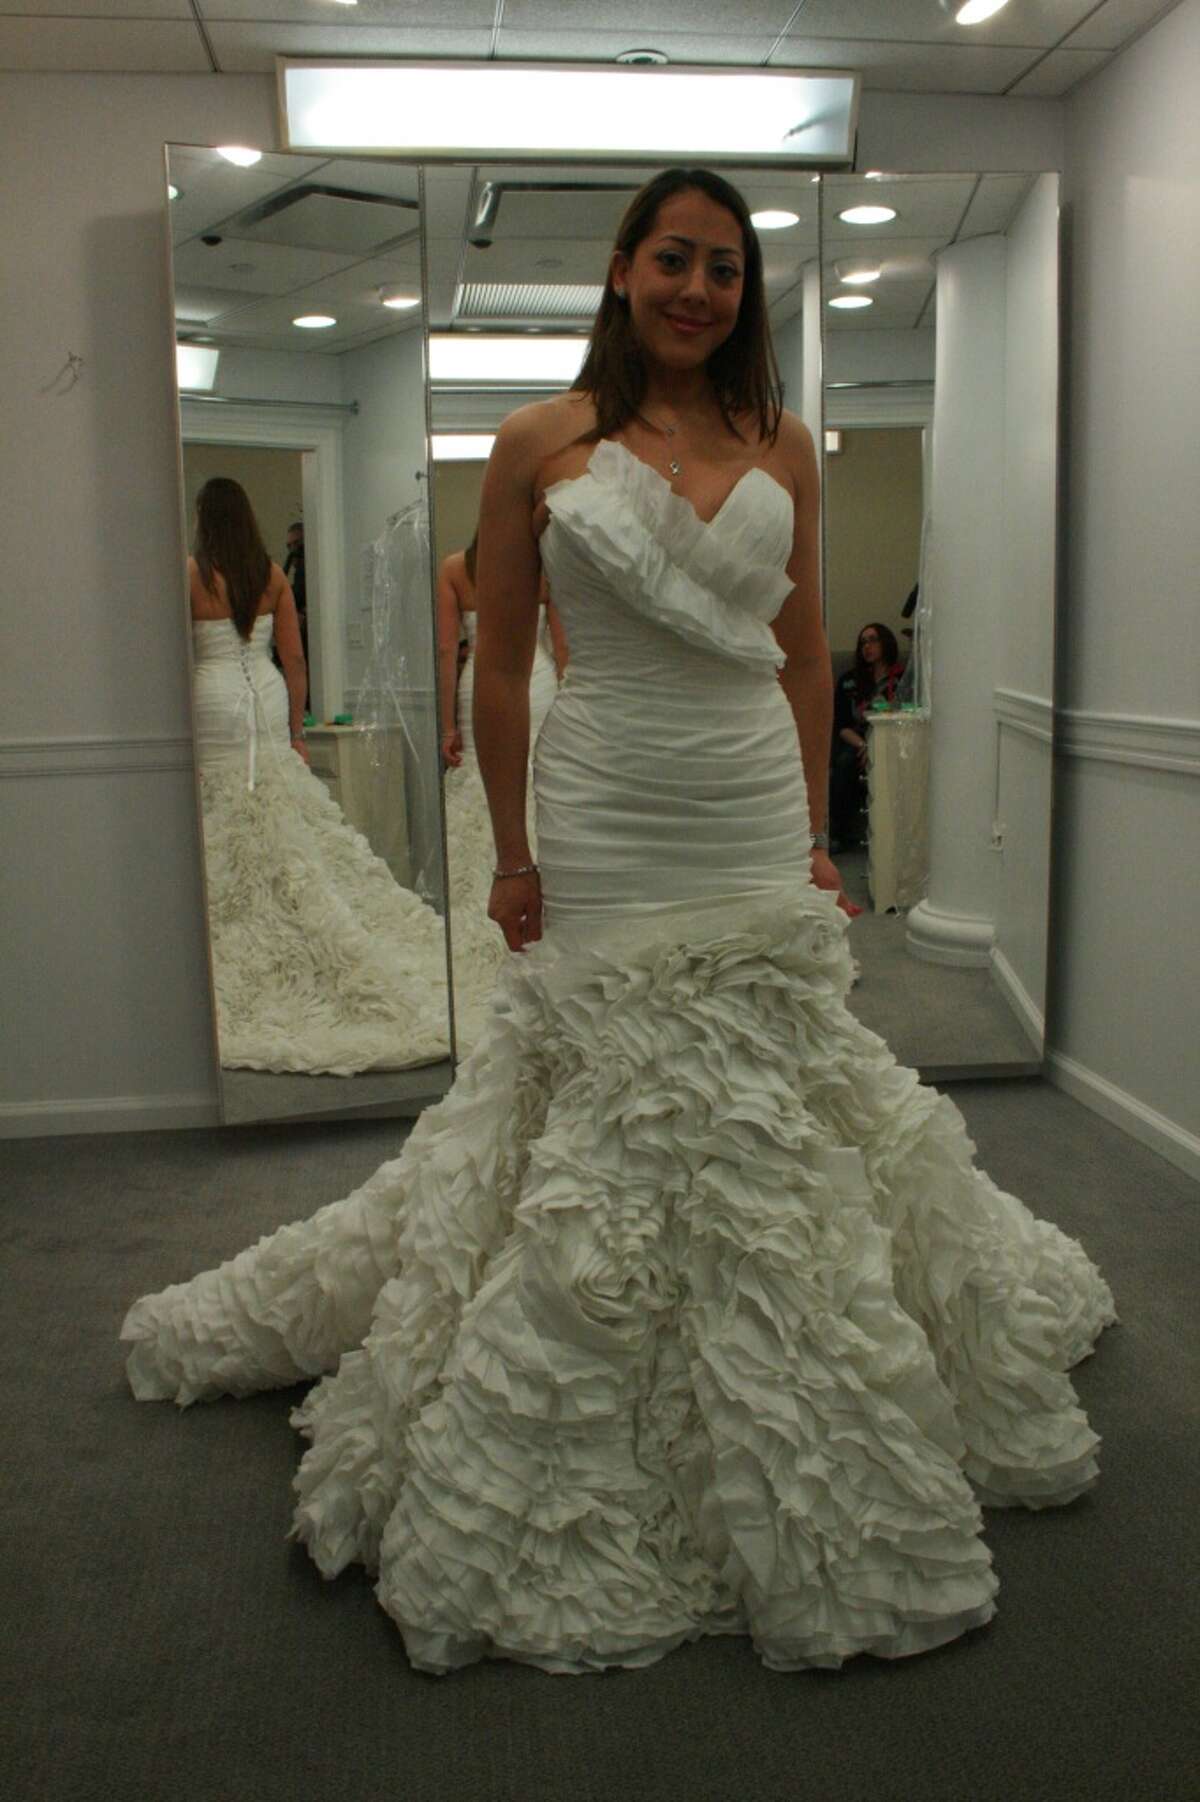 Tamara Loyola, of Bridgeport, searches for a new wedding gown on an upcoming episode of TLC's "Say Yes To The Dress."